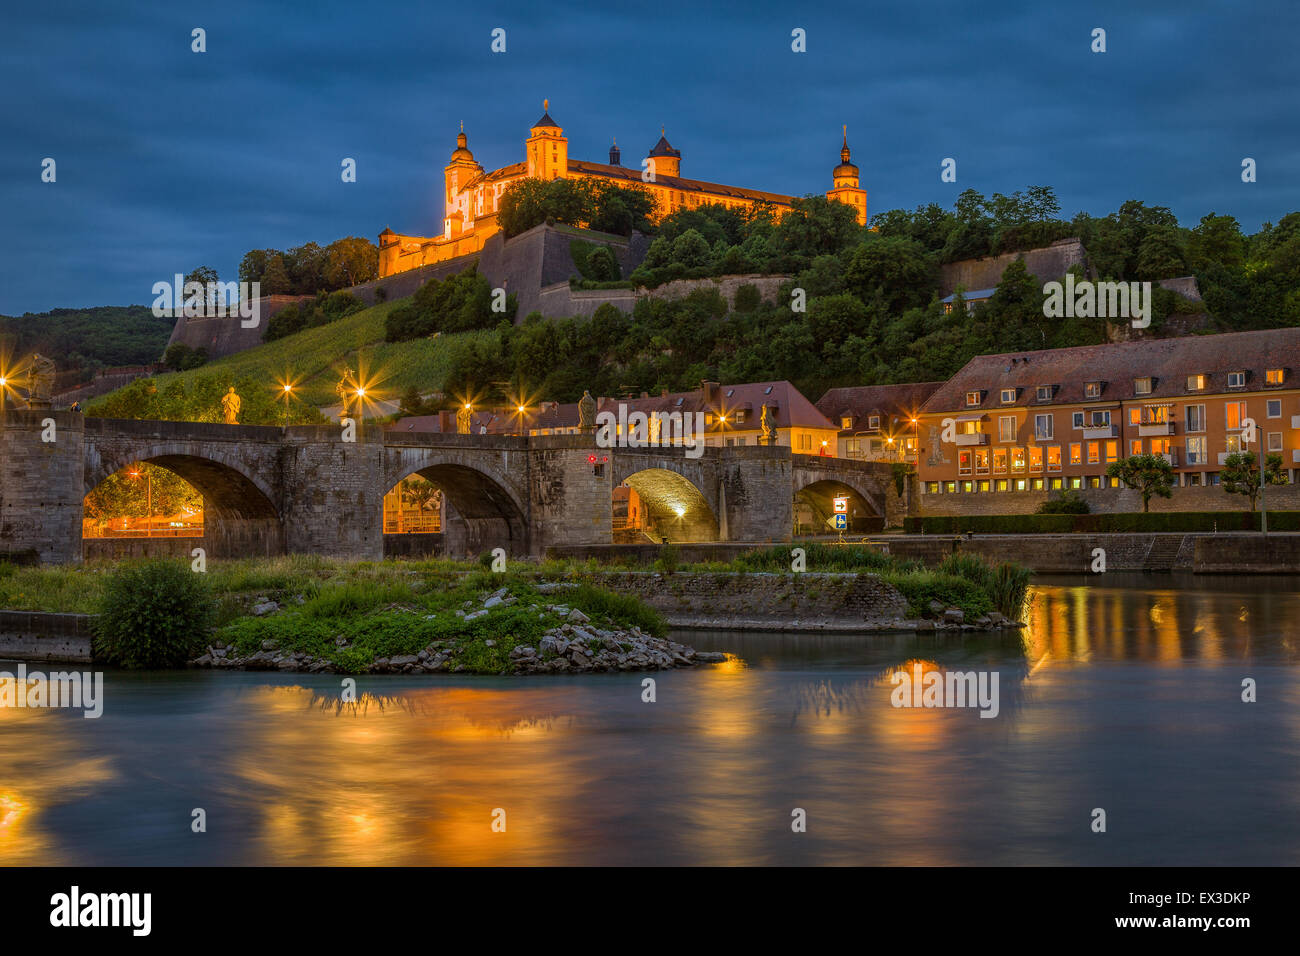 View across the River Main towards the Old Main Bridge and Marienberg Fortress in the evening, Wuerzburg, Lower Franconia Stock Photo